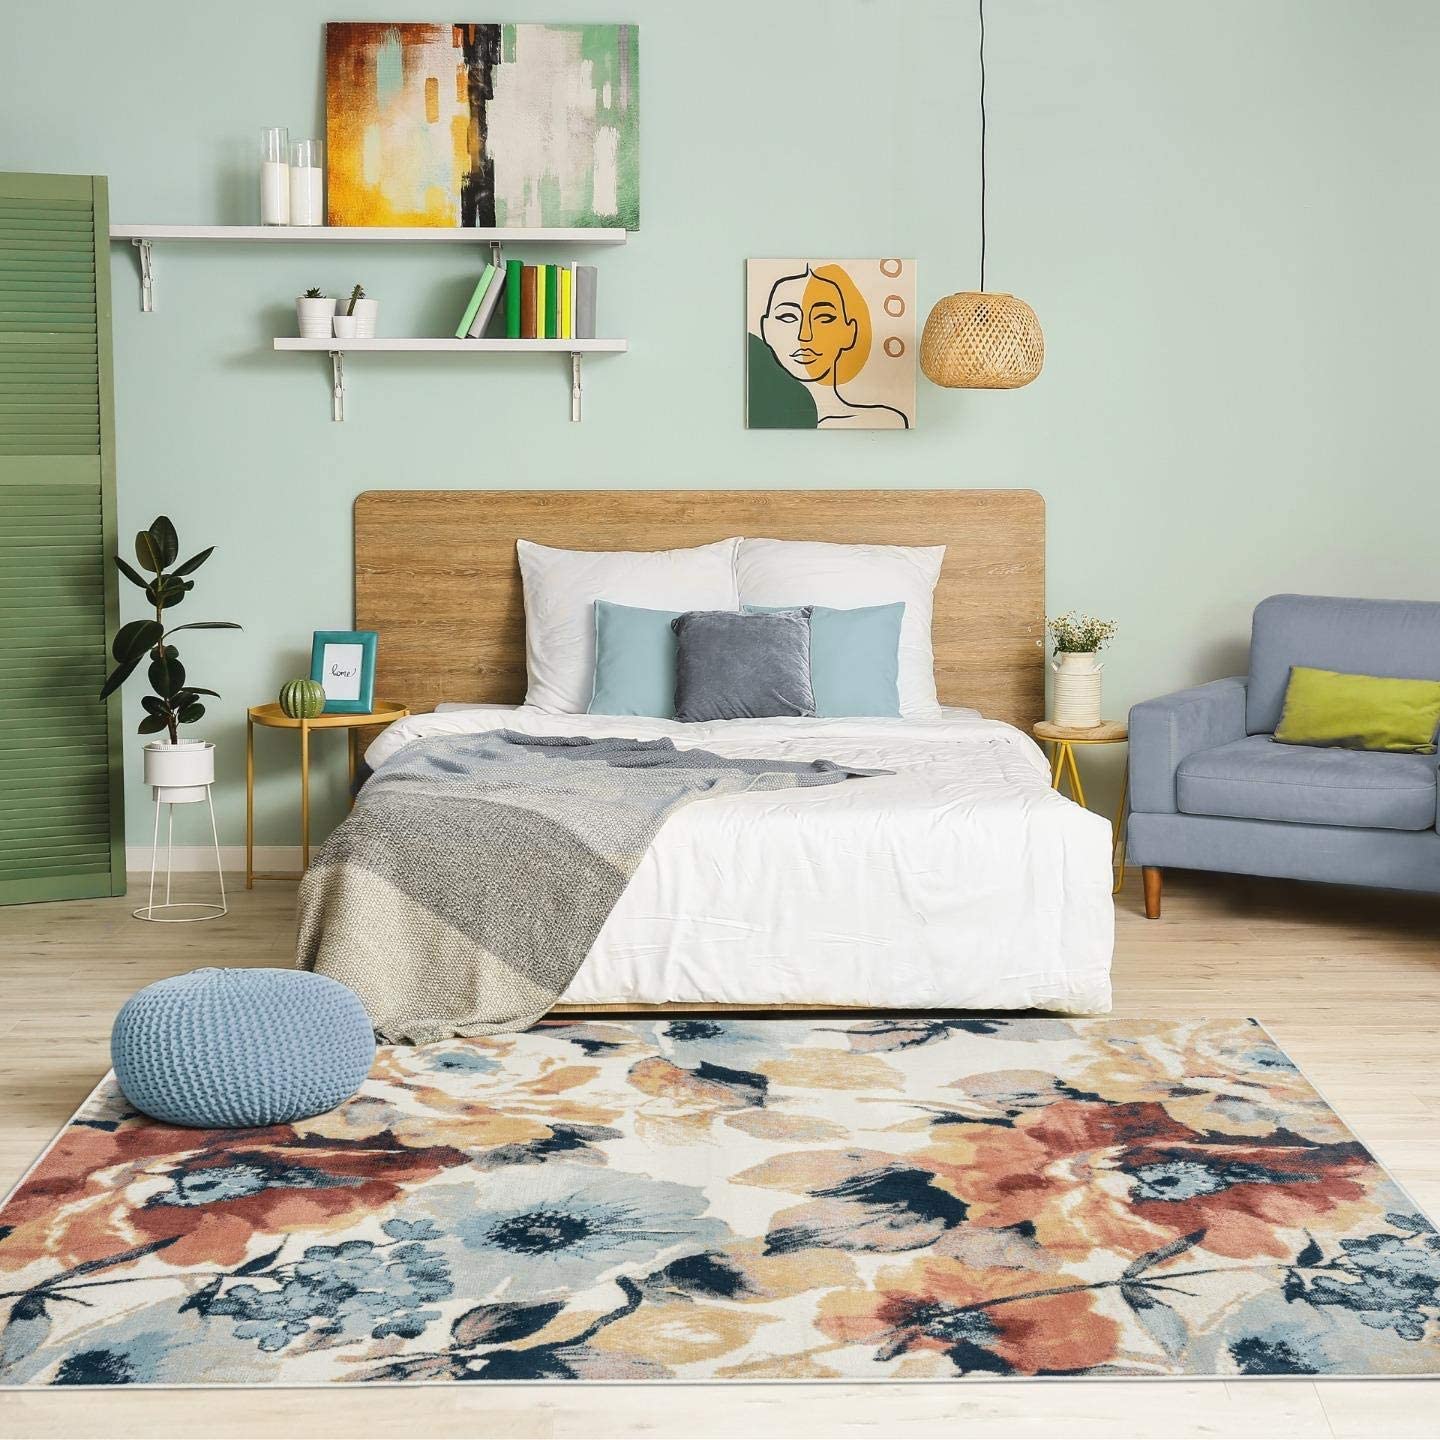 Olimpia Collection Multi Modern Floral Soft Area Rug